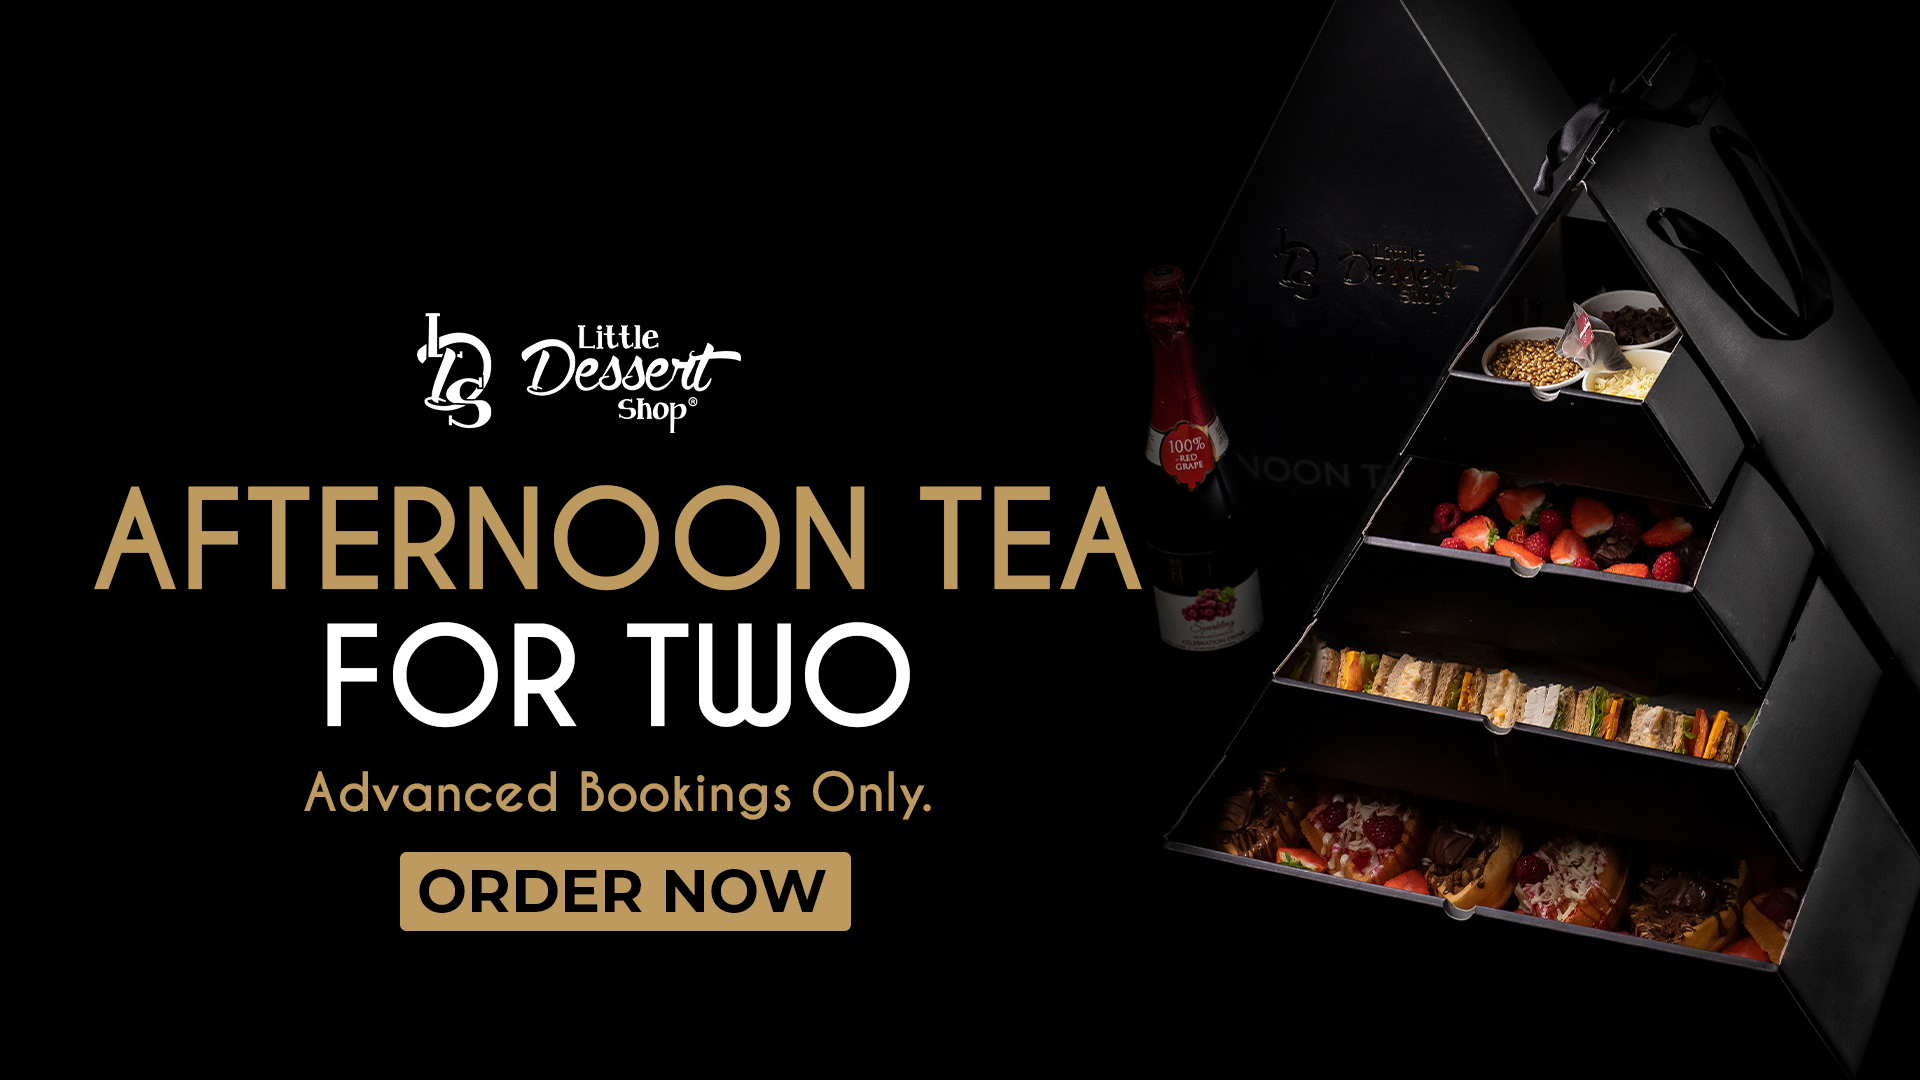 Little Dessert Shop Afternoon Tea For Two Is Here